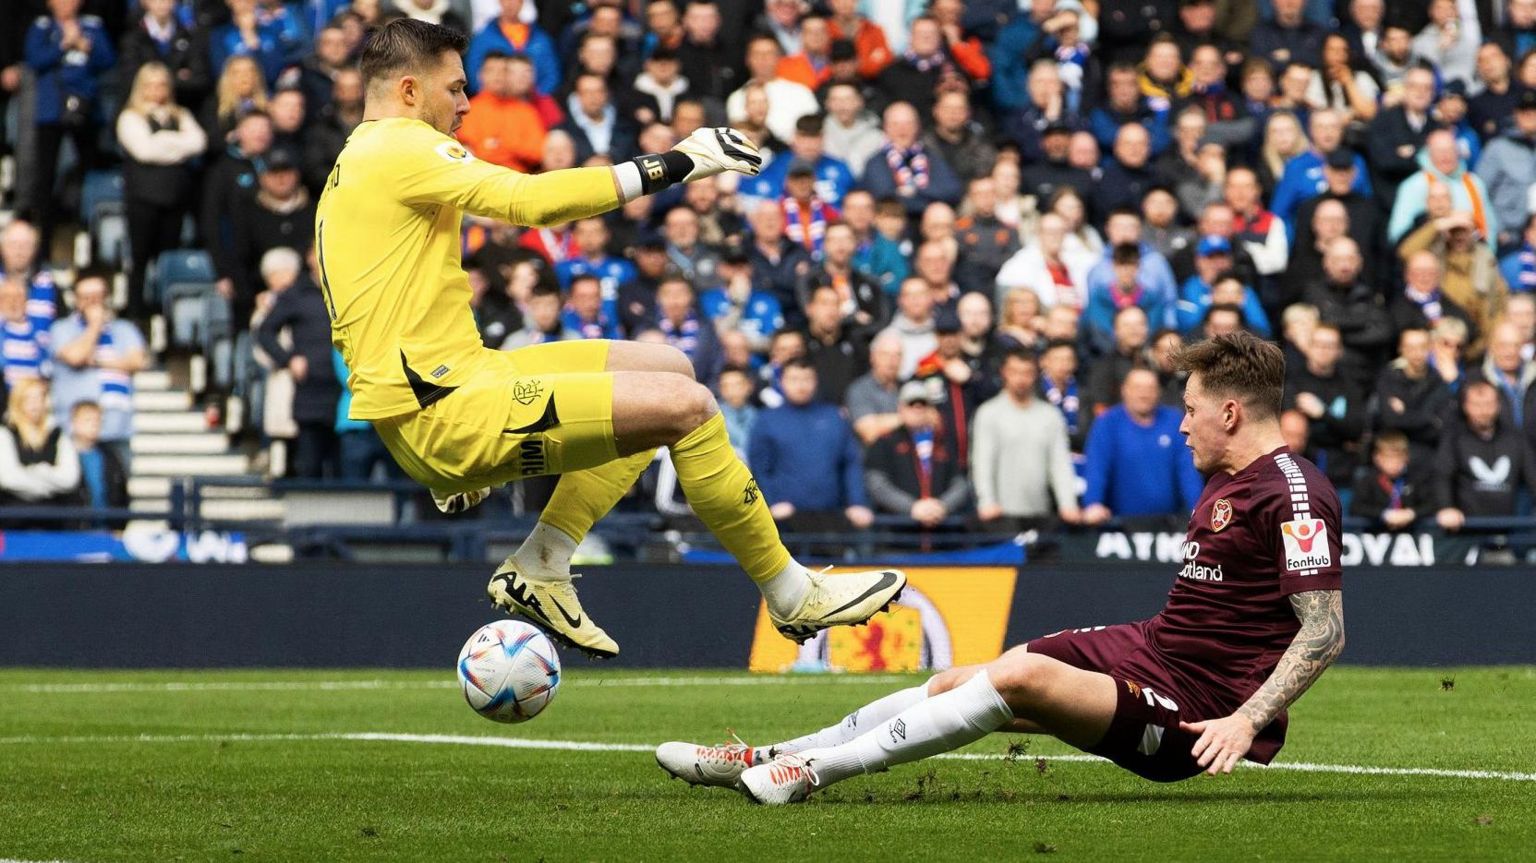 Rangers' Jack Butland saves from Hearts' Frankie Kent